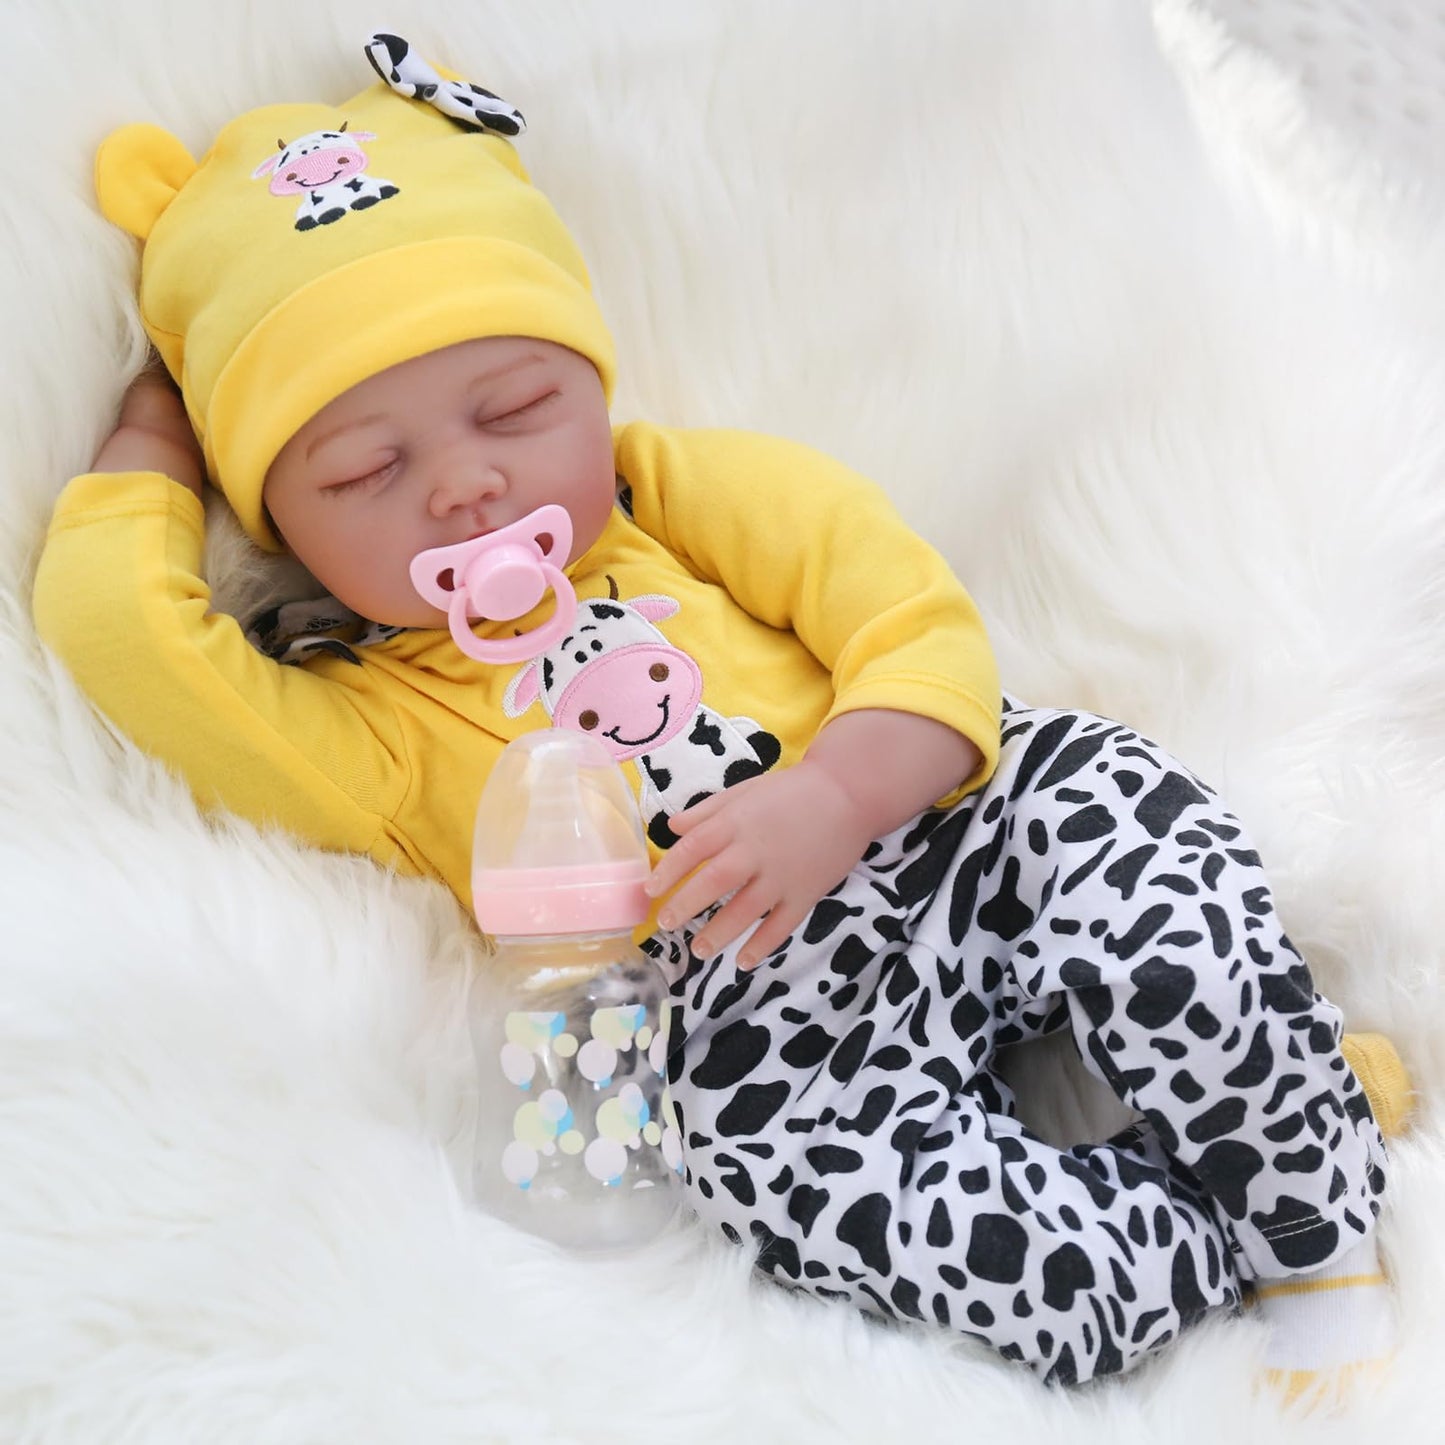 22 Inch Realistic Newborn Baby Dolls Real Life Baby Dolls Gifts/Toys for Collection & Kids Age 3+